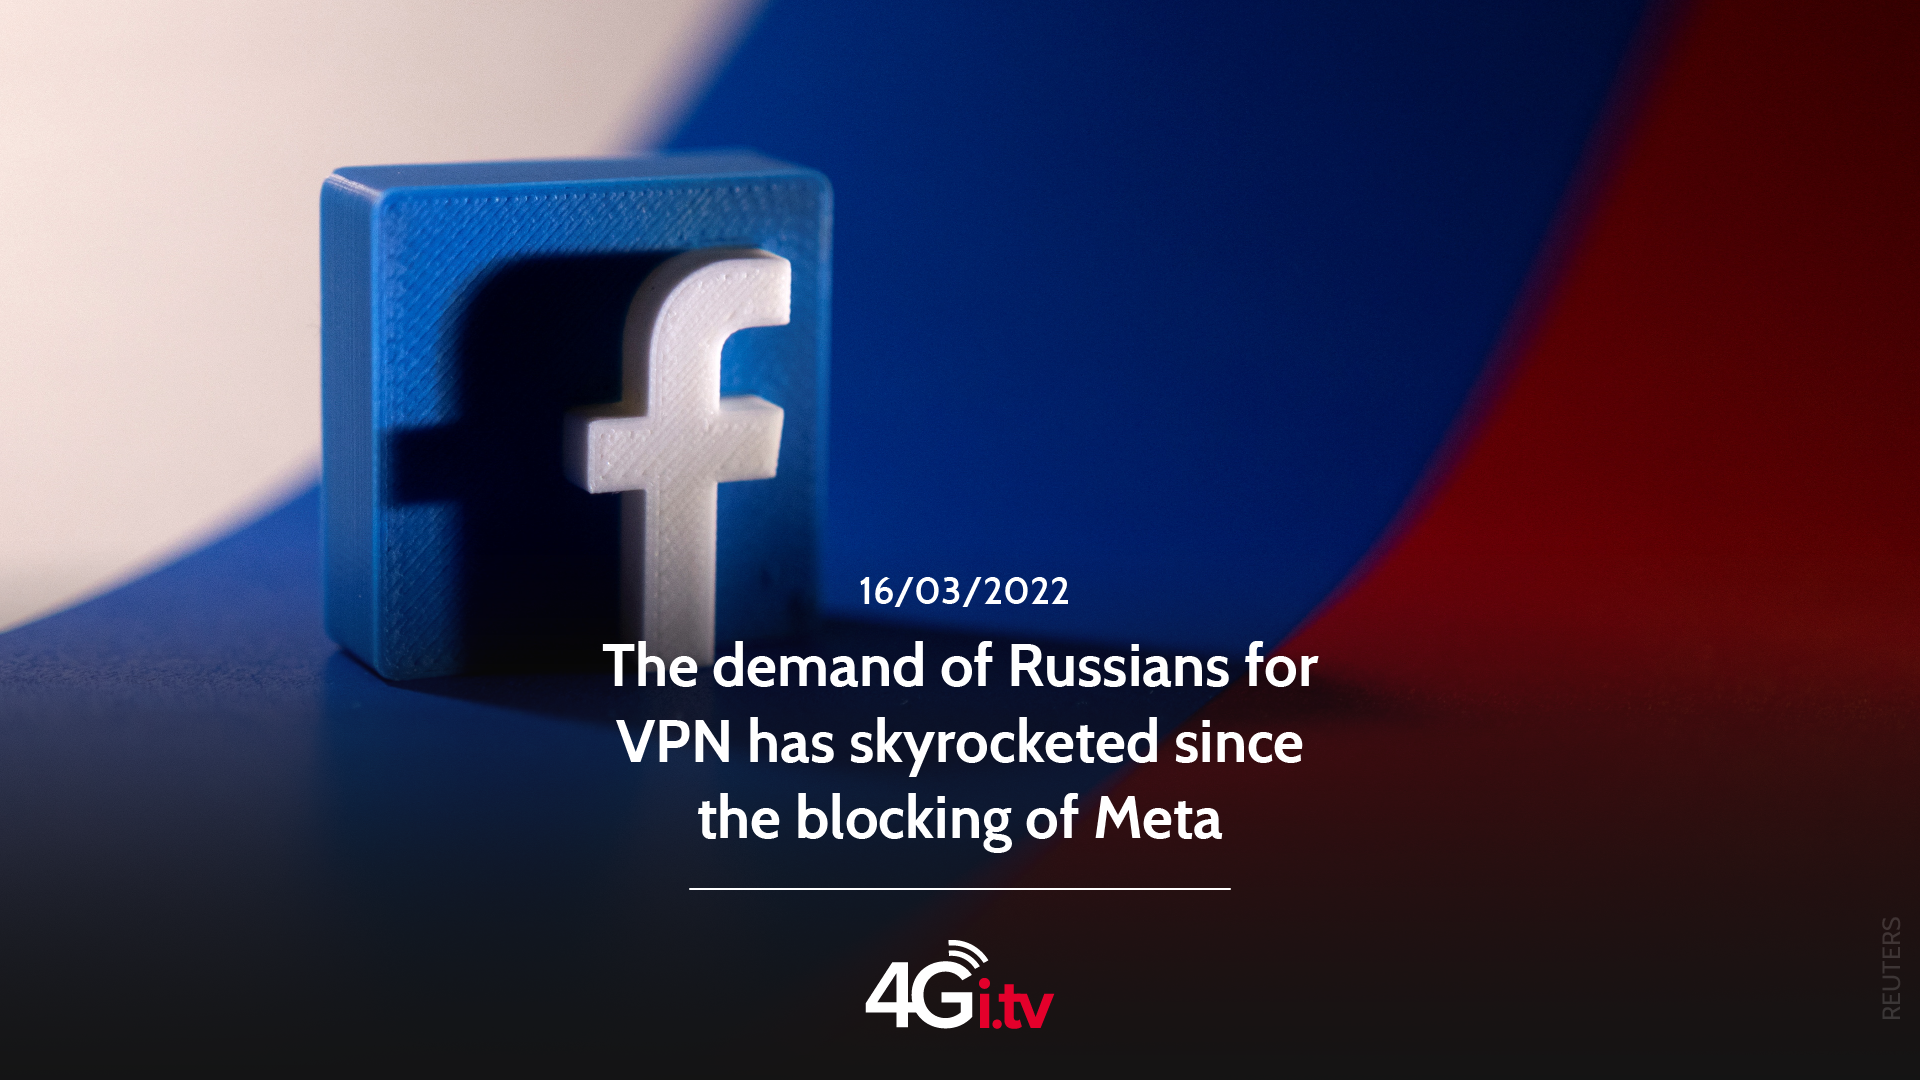 Подробнее о статье The demand of Russians for VPN has skyrocketed since the blocking of Meta